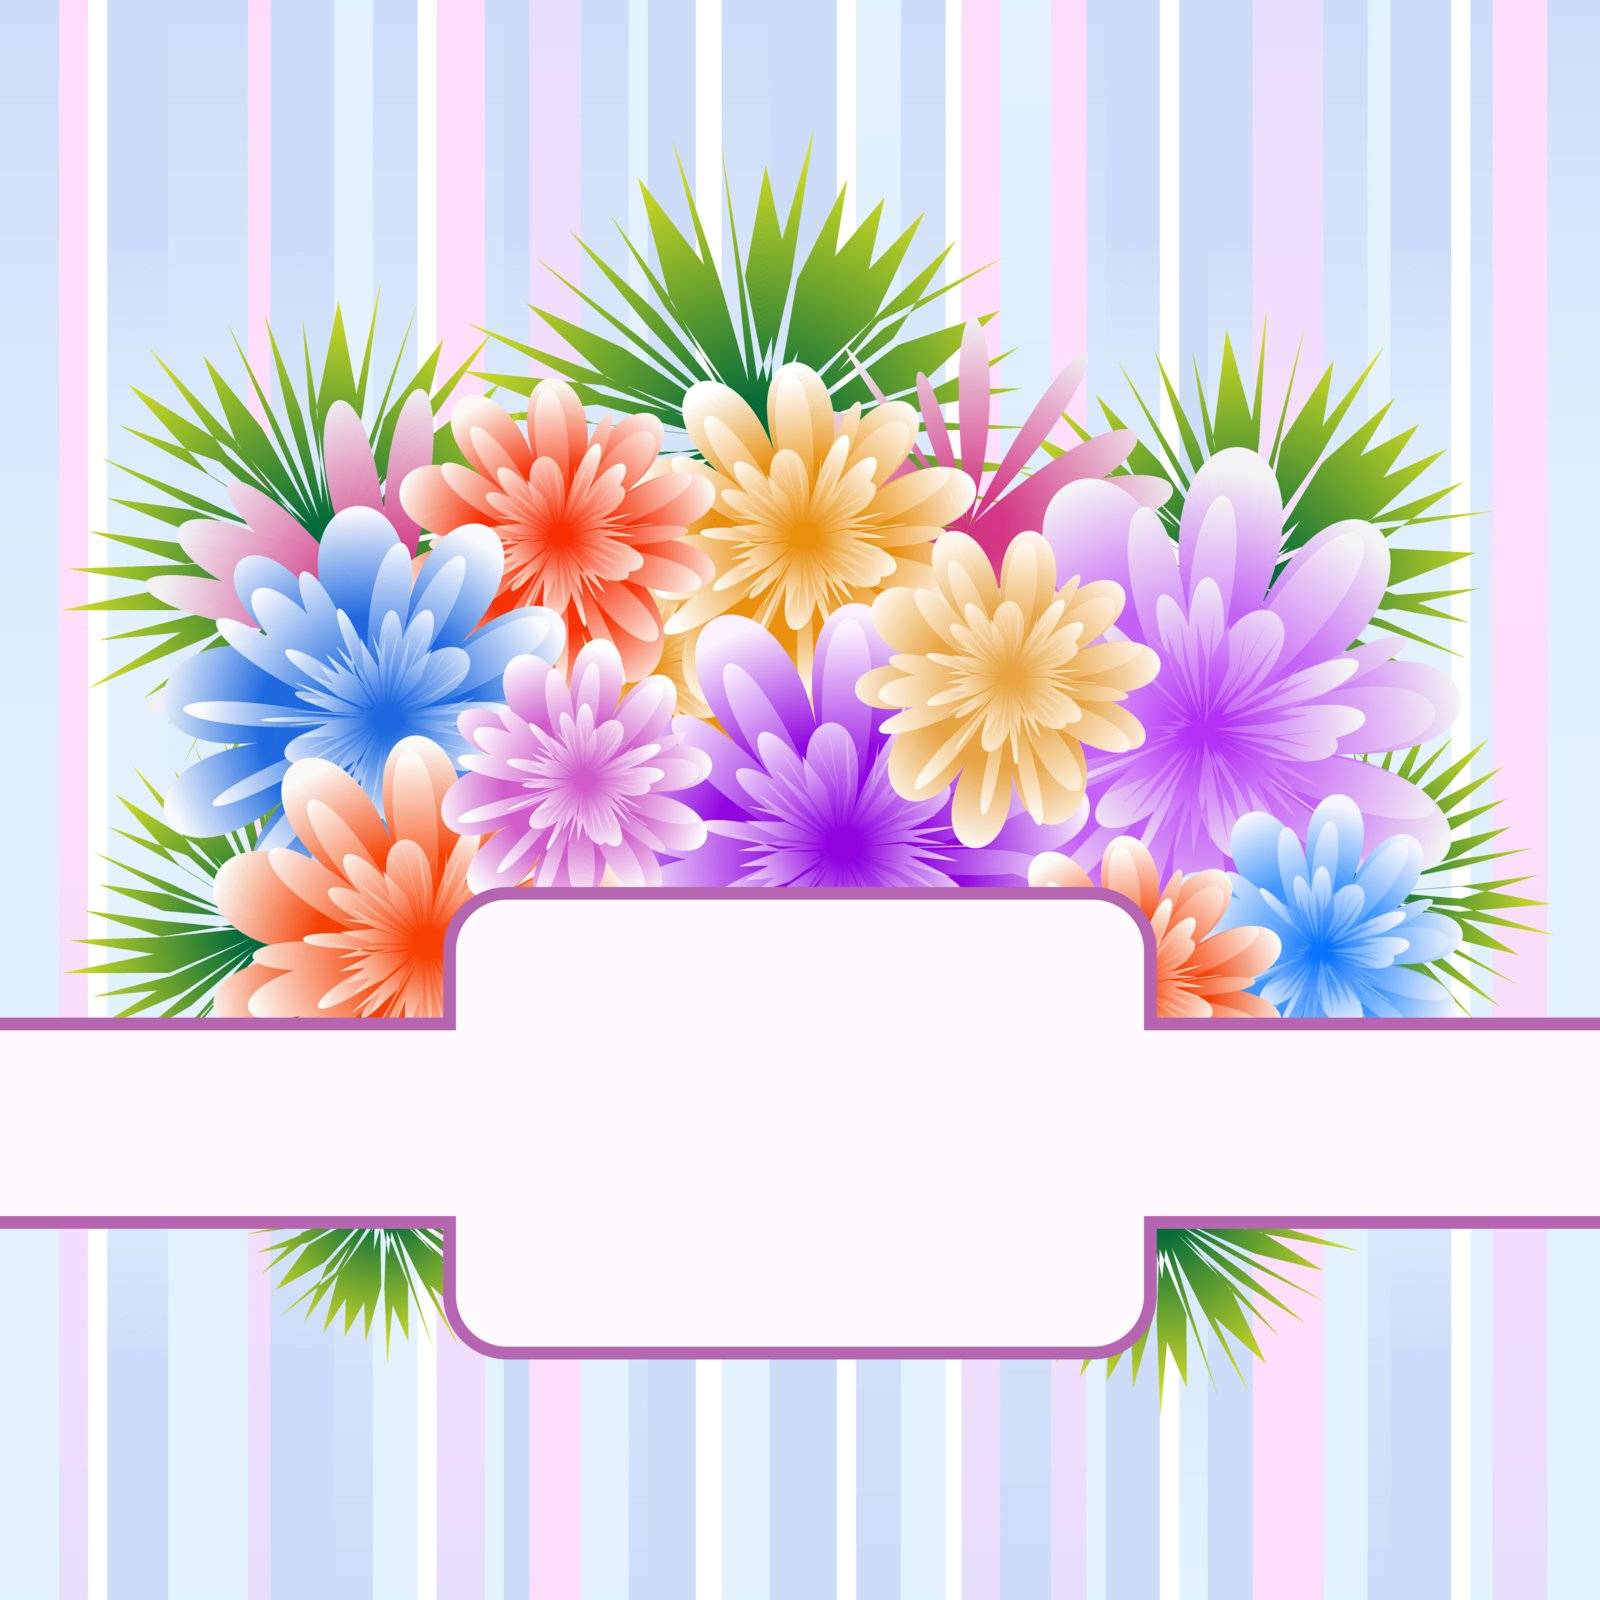 Flowers on striped background by toots